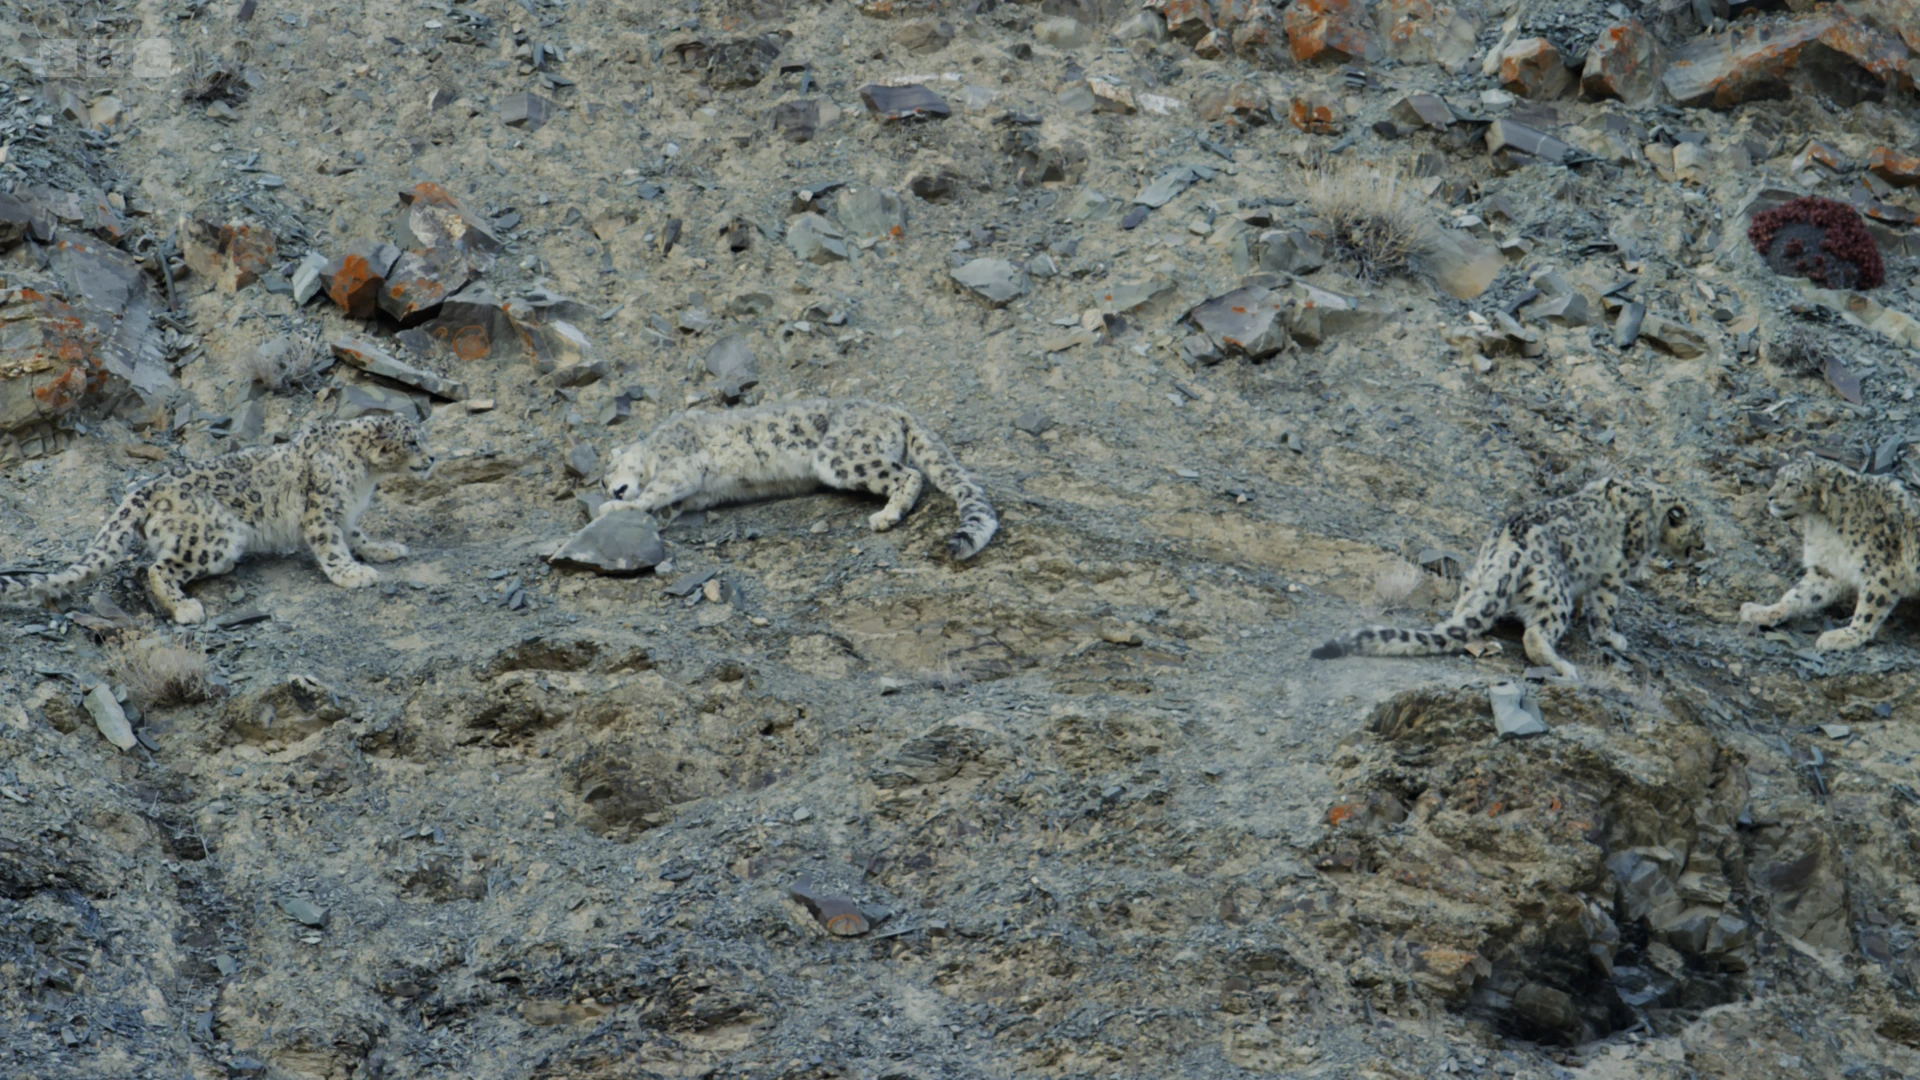 Snow leopard (Panthera uncia) as shown in Planet Earth II - Mountains